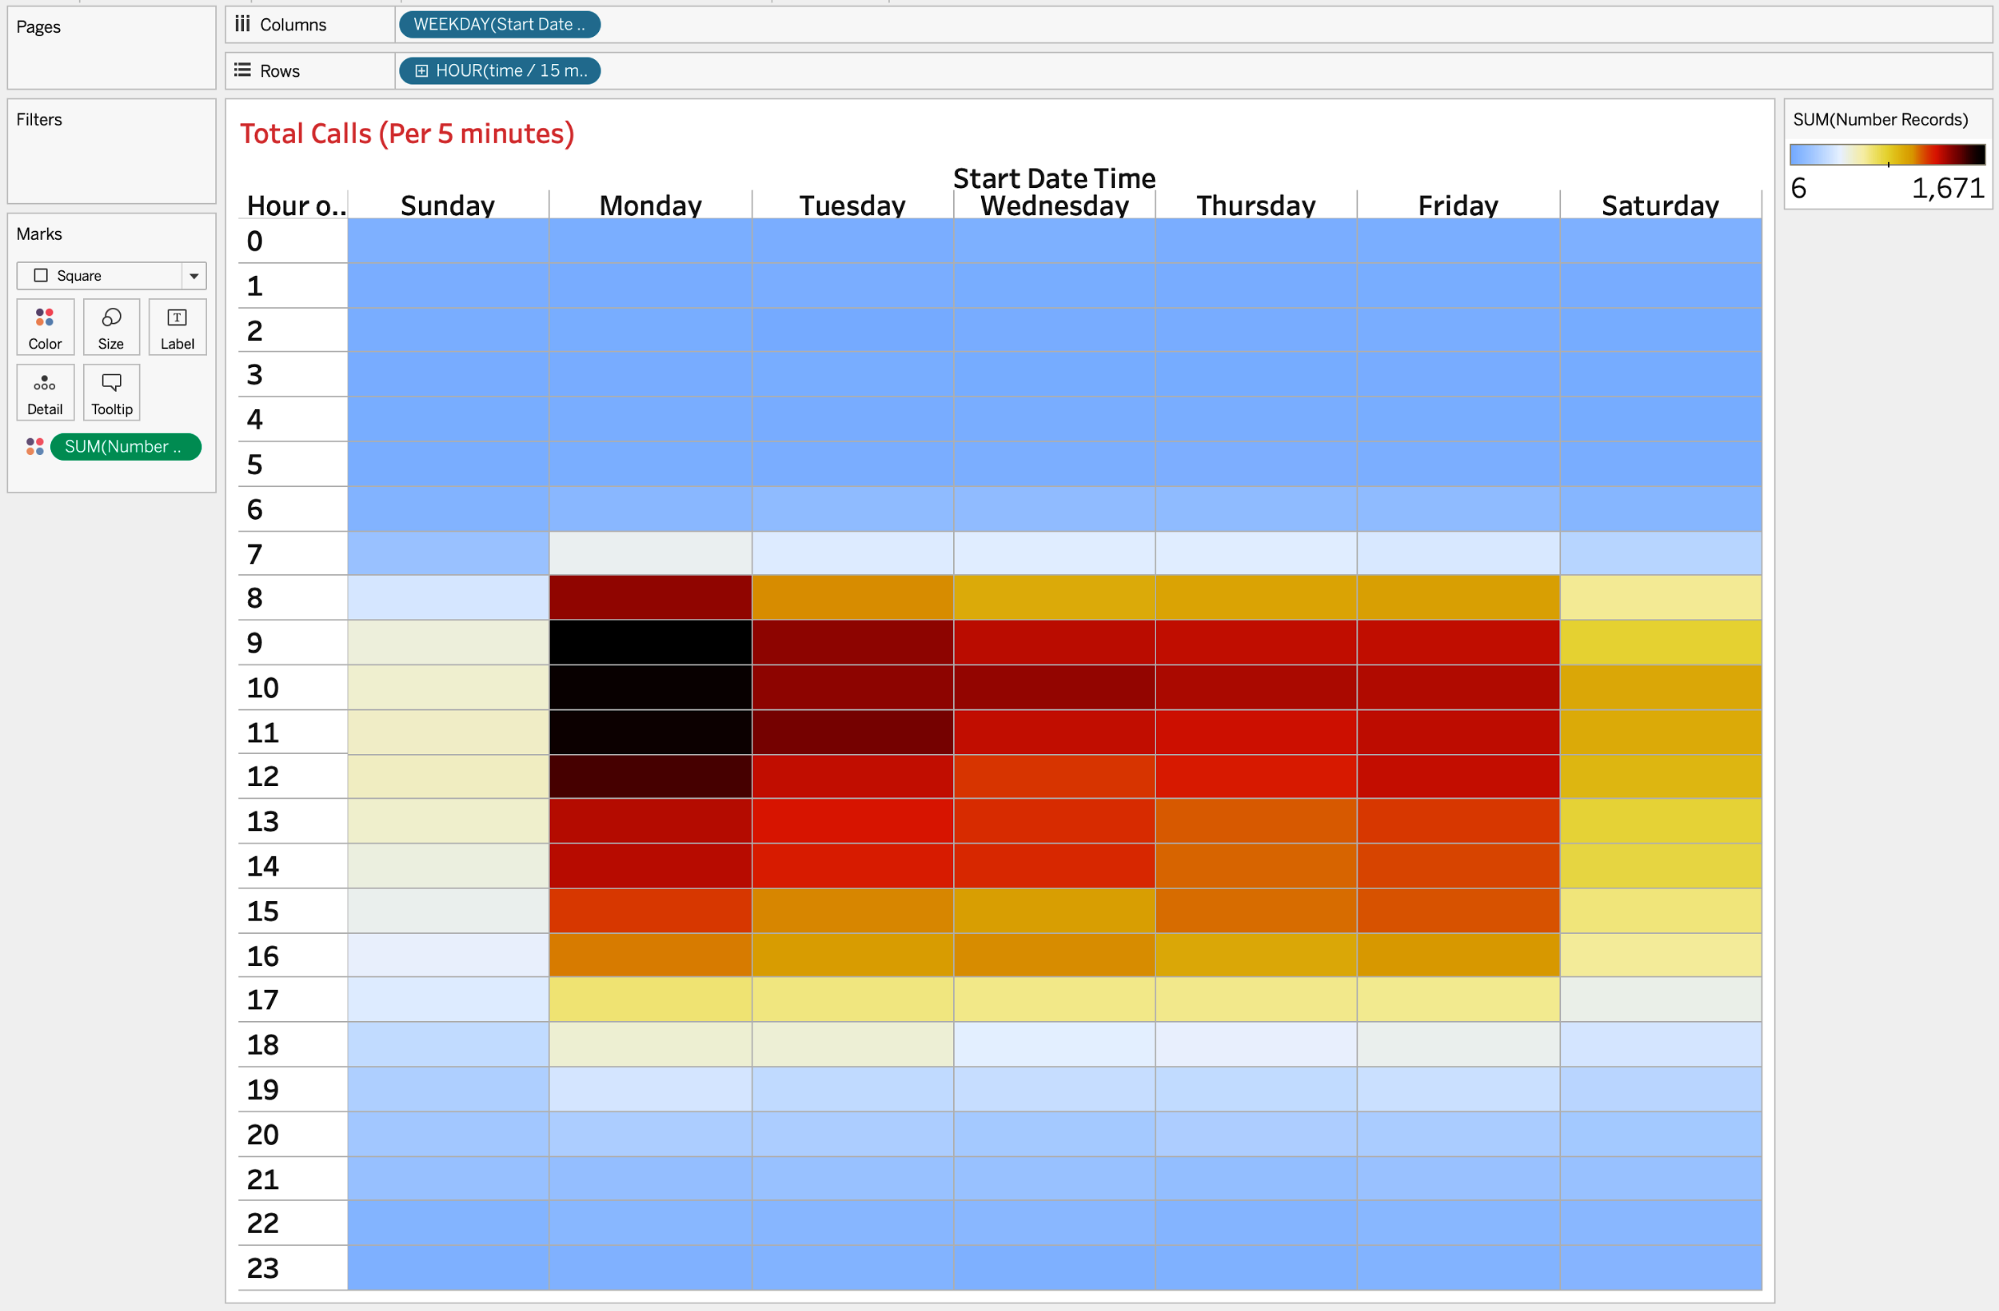 Total calls every hour of the day and day of the week using a heatmap